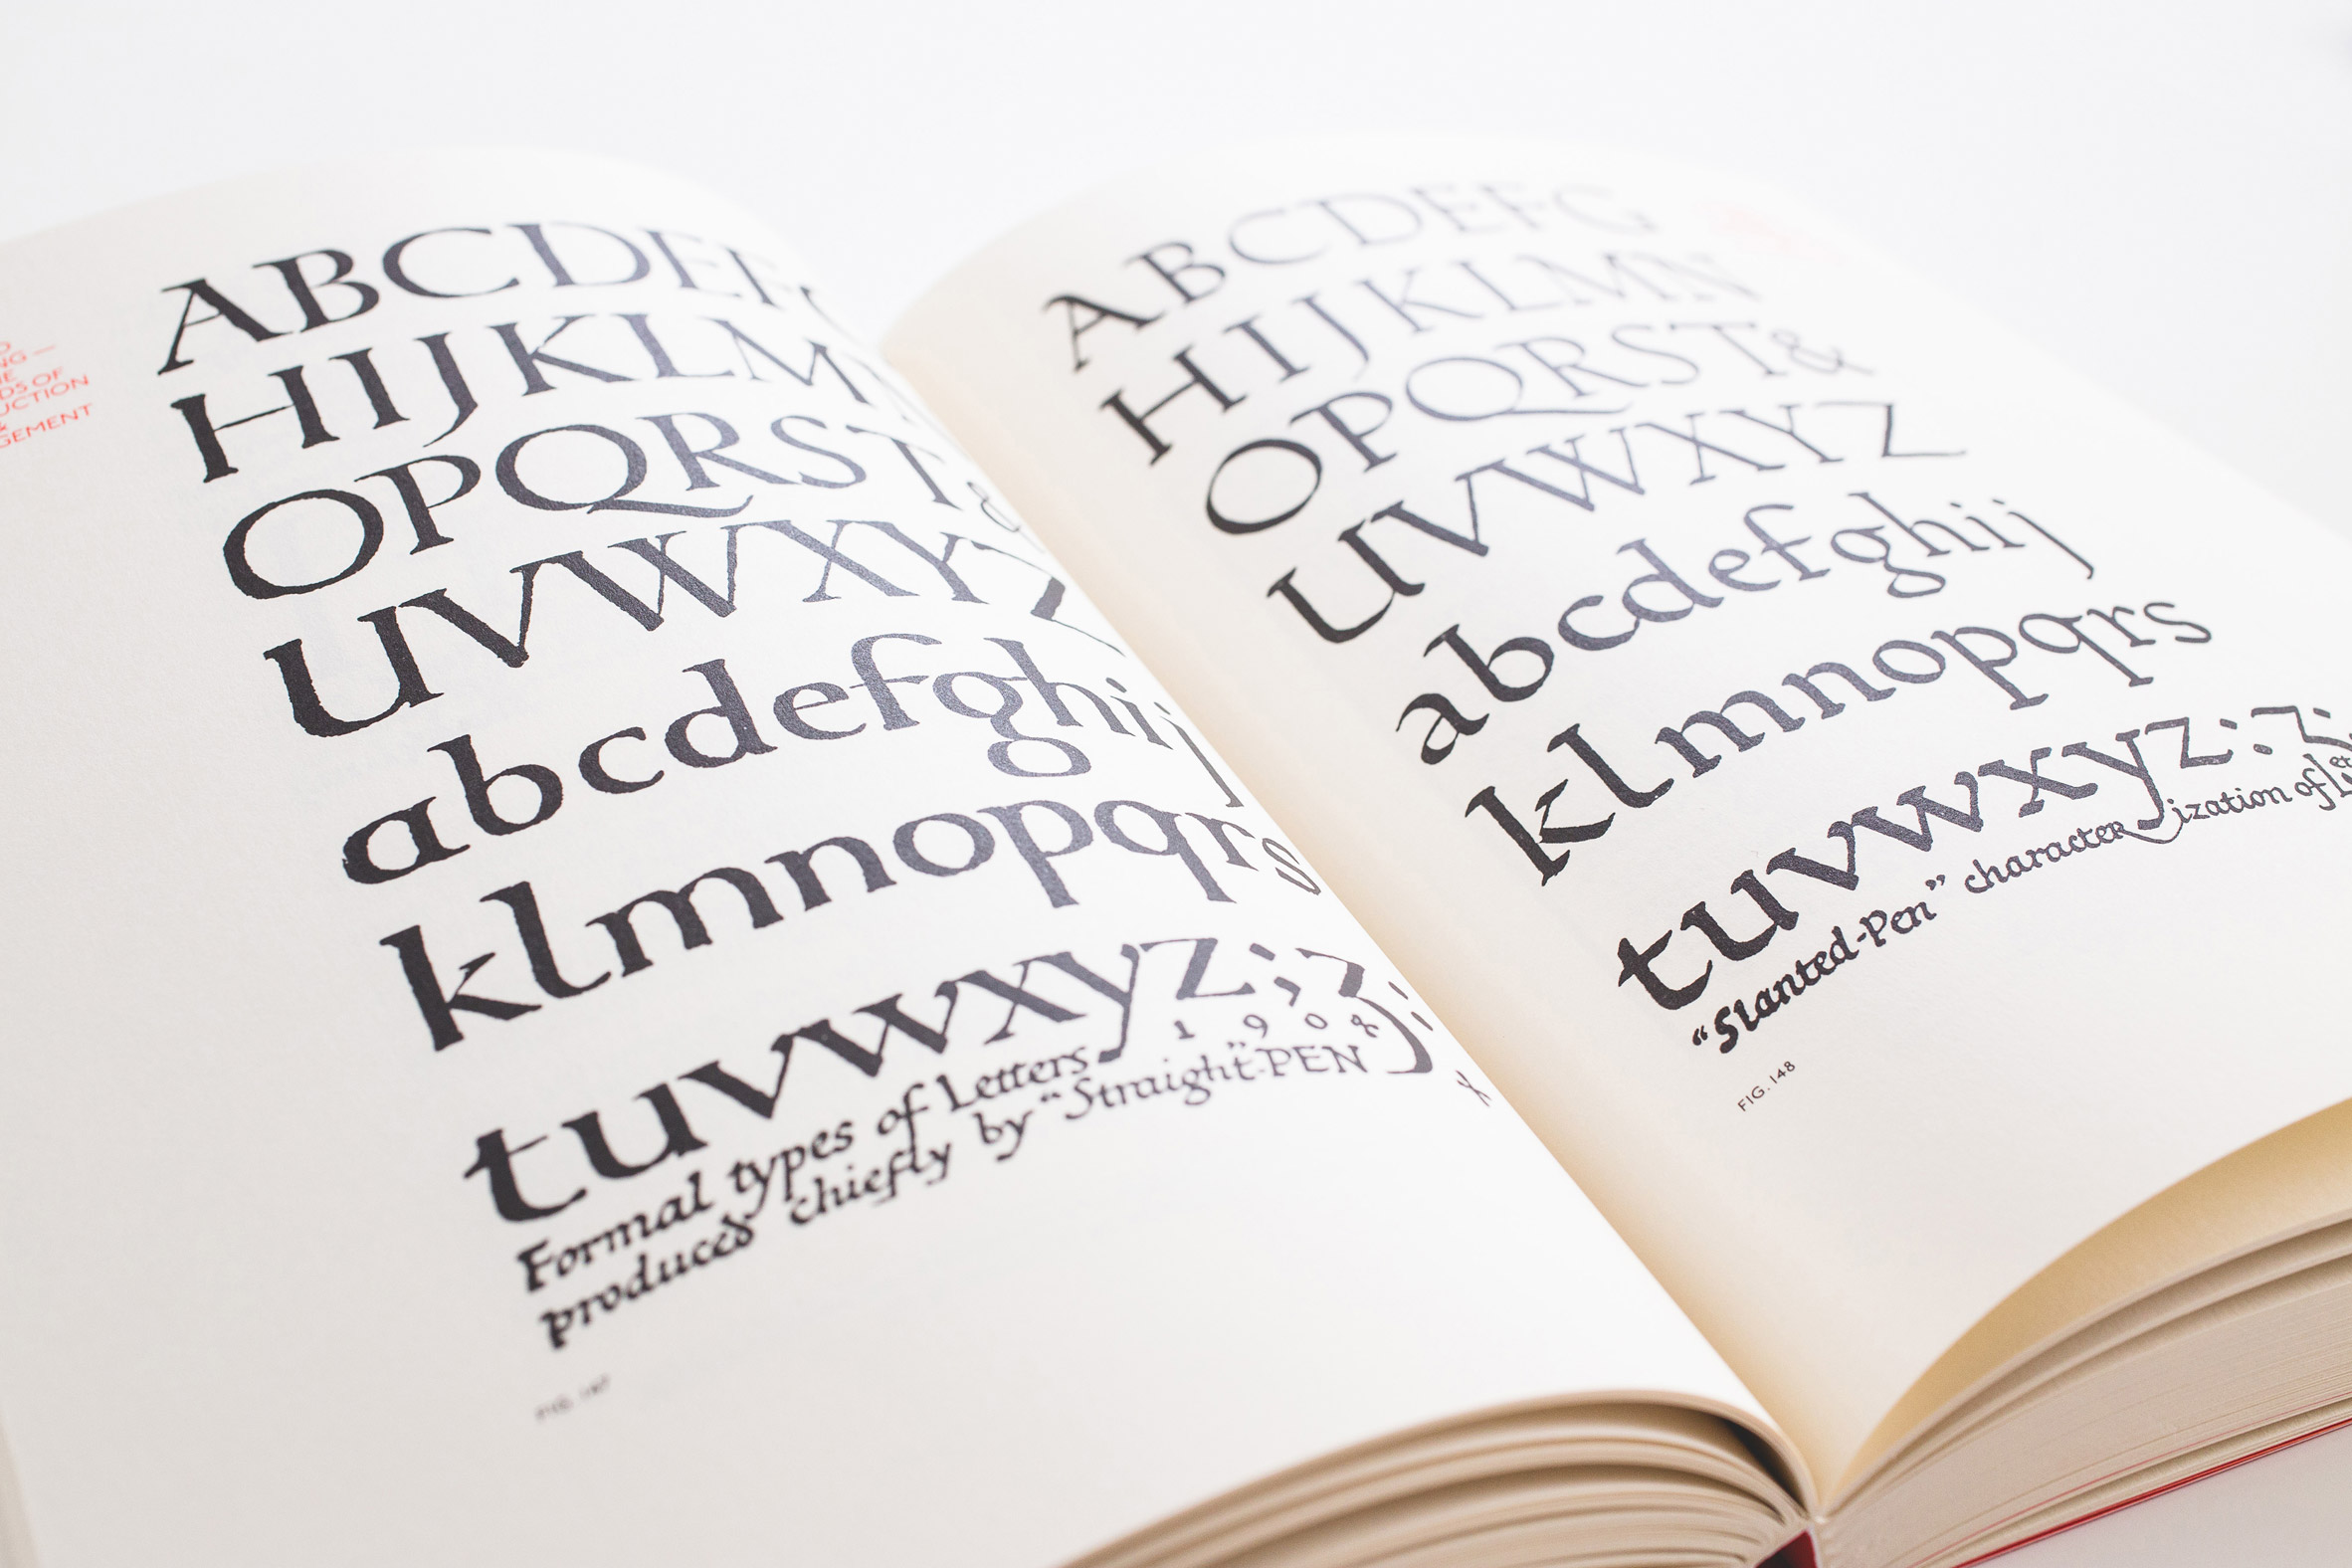 competition-edward-johnston-writing-and-illuminating-lettering-book_dezeen_2364_col_1